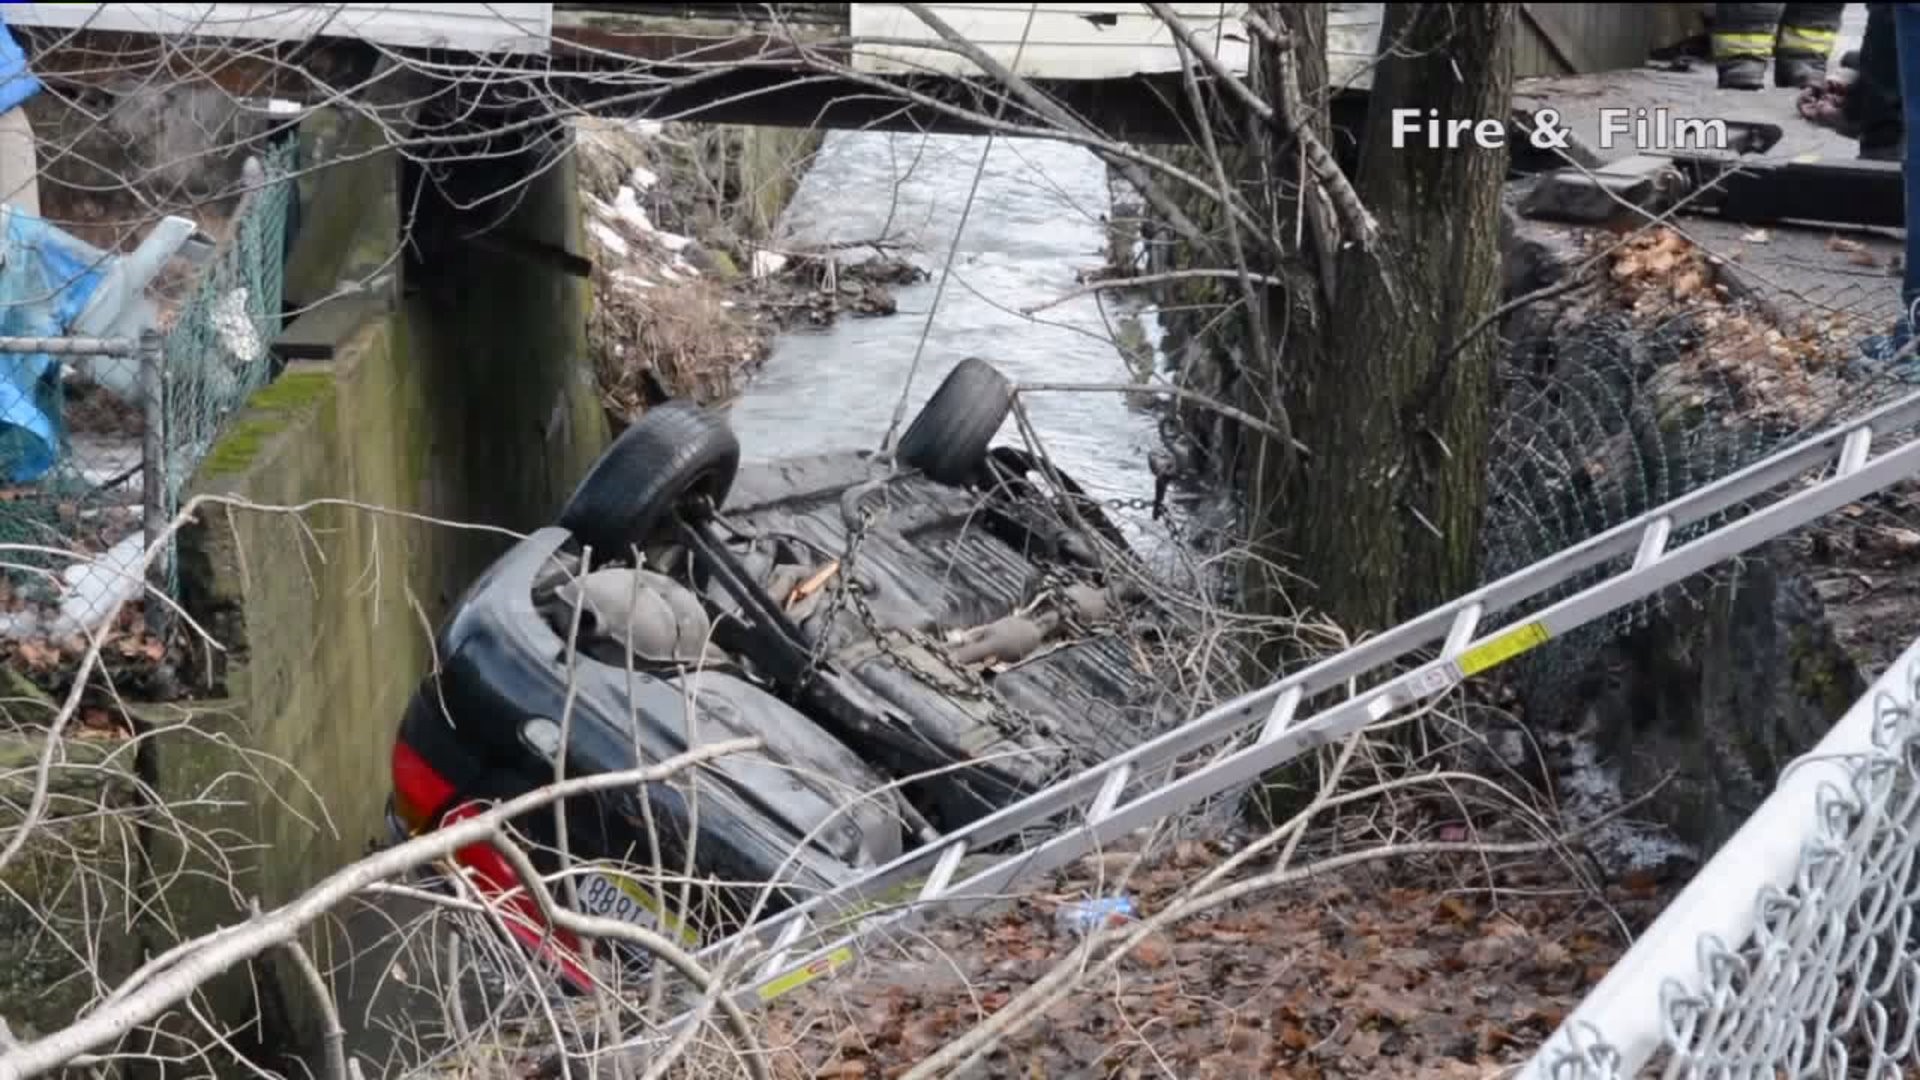 Schuylkill County Police Rescue Driver After Car Ends Up in a Creek